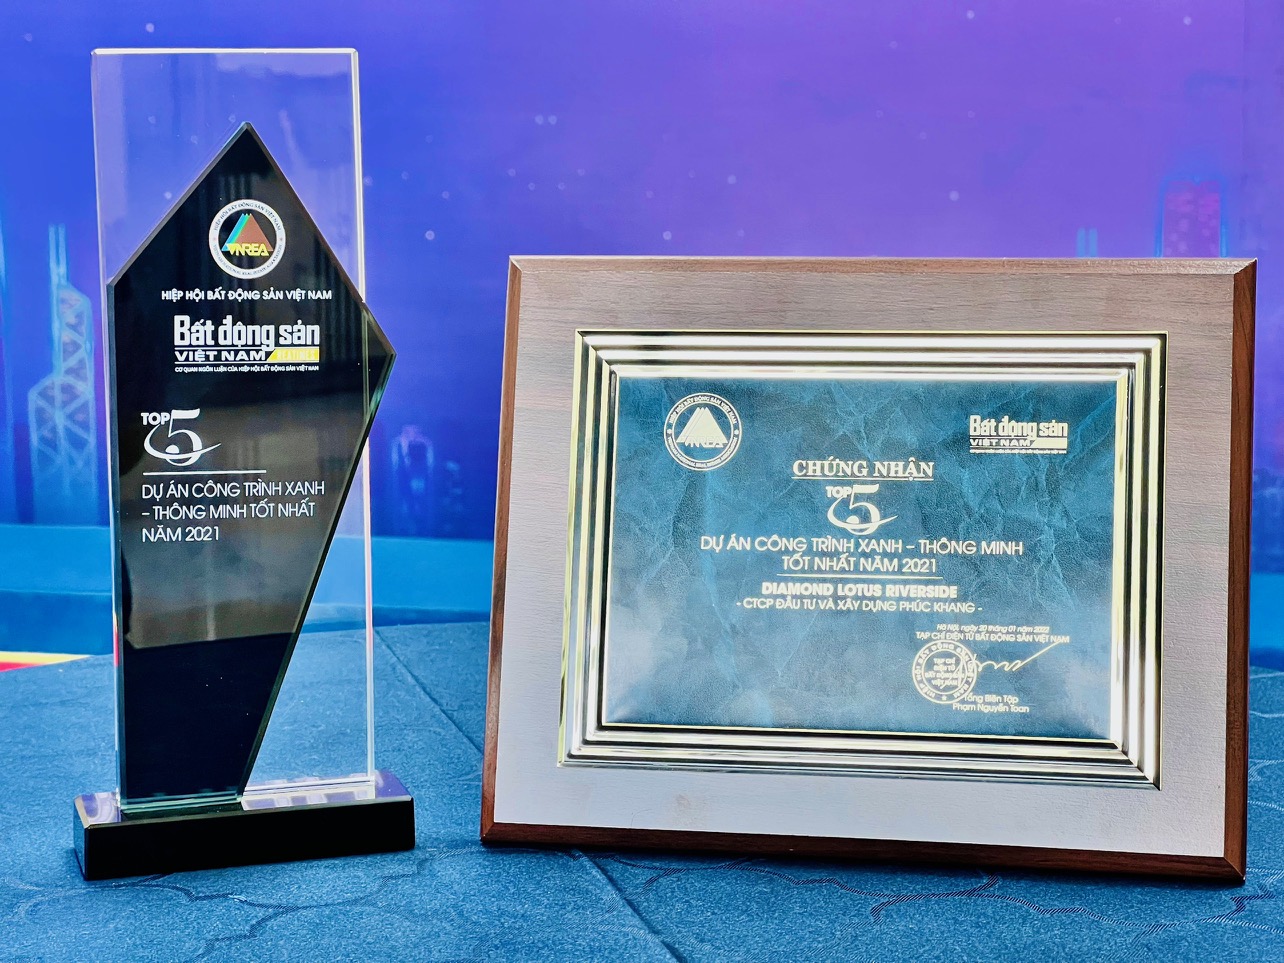 The trophy and certificate recognizing the Diamond Lotus Riverside project of Phuc Khang Corporation as one of the five best green-smart constructions in 2021